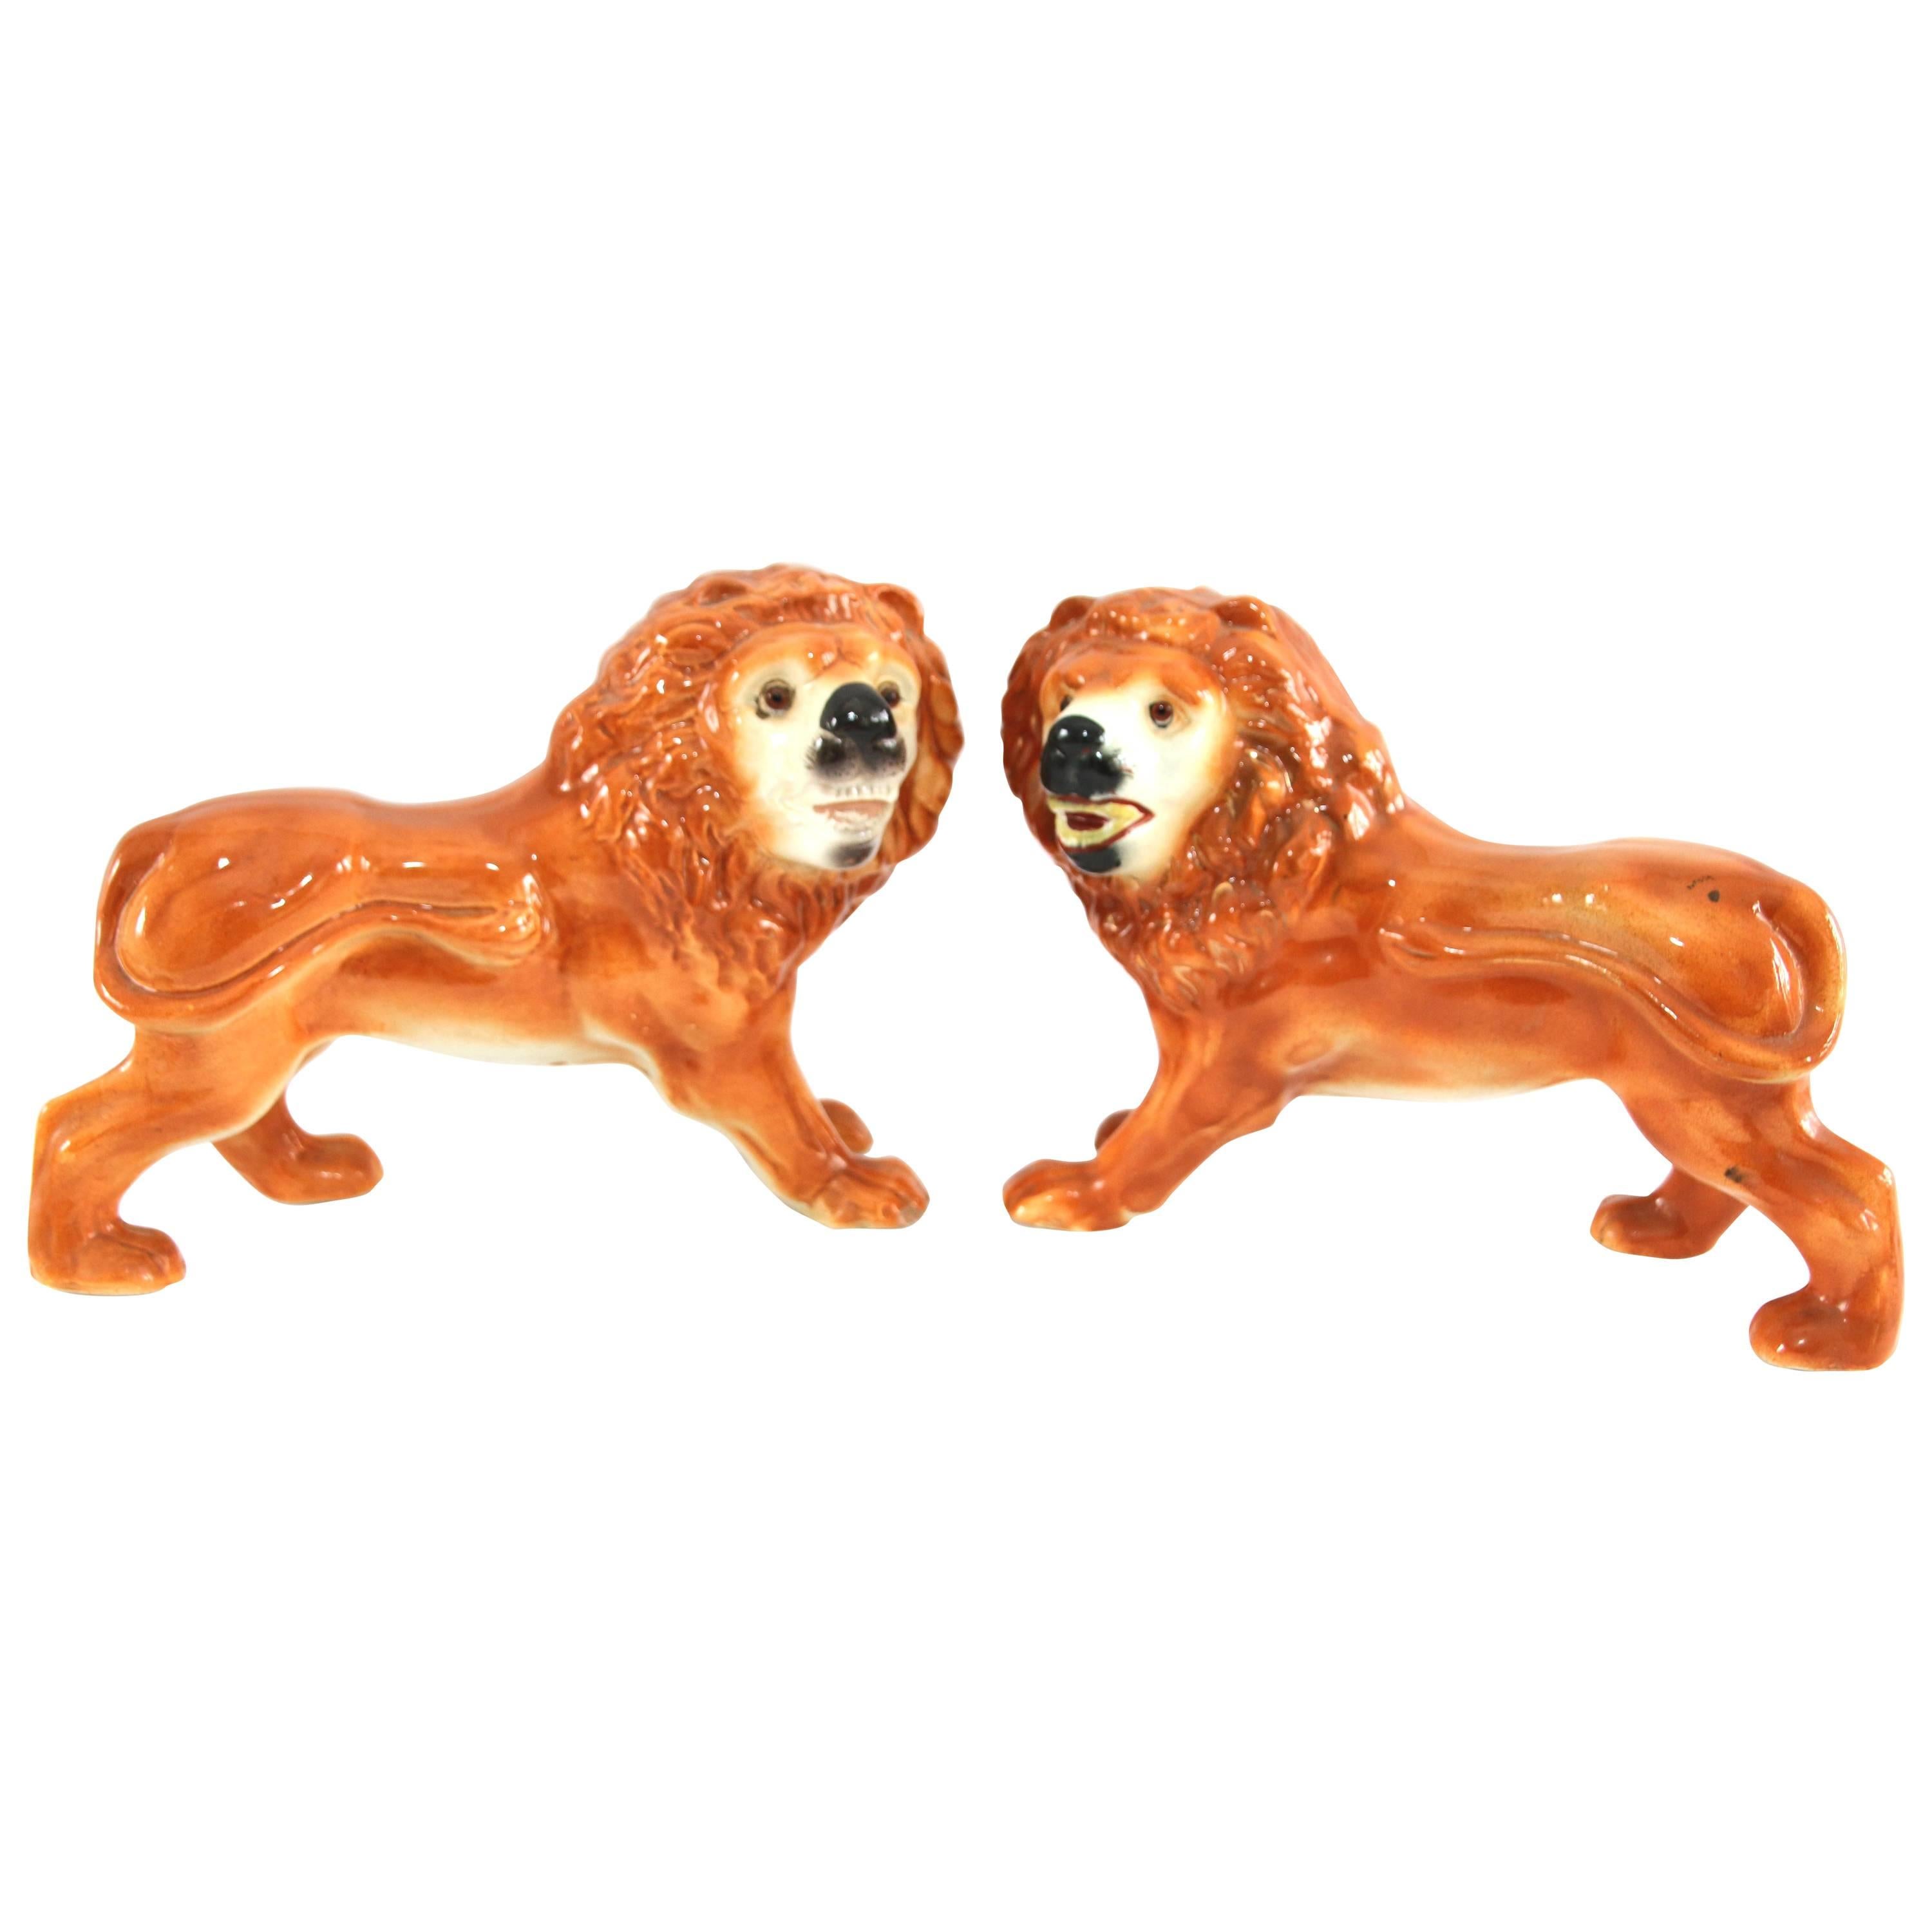 Pair of 19th Century Regal Staffordshire Opposing Lions